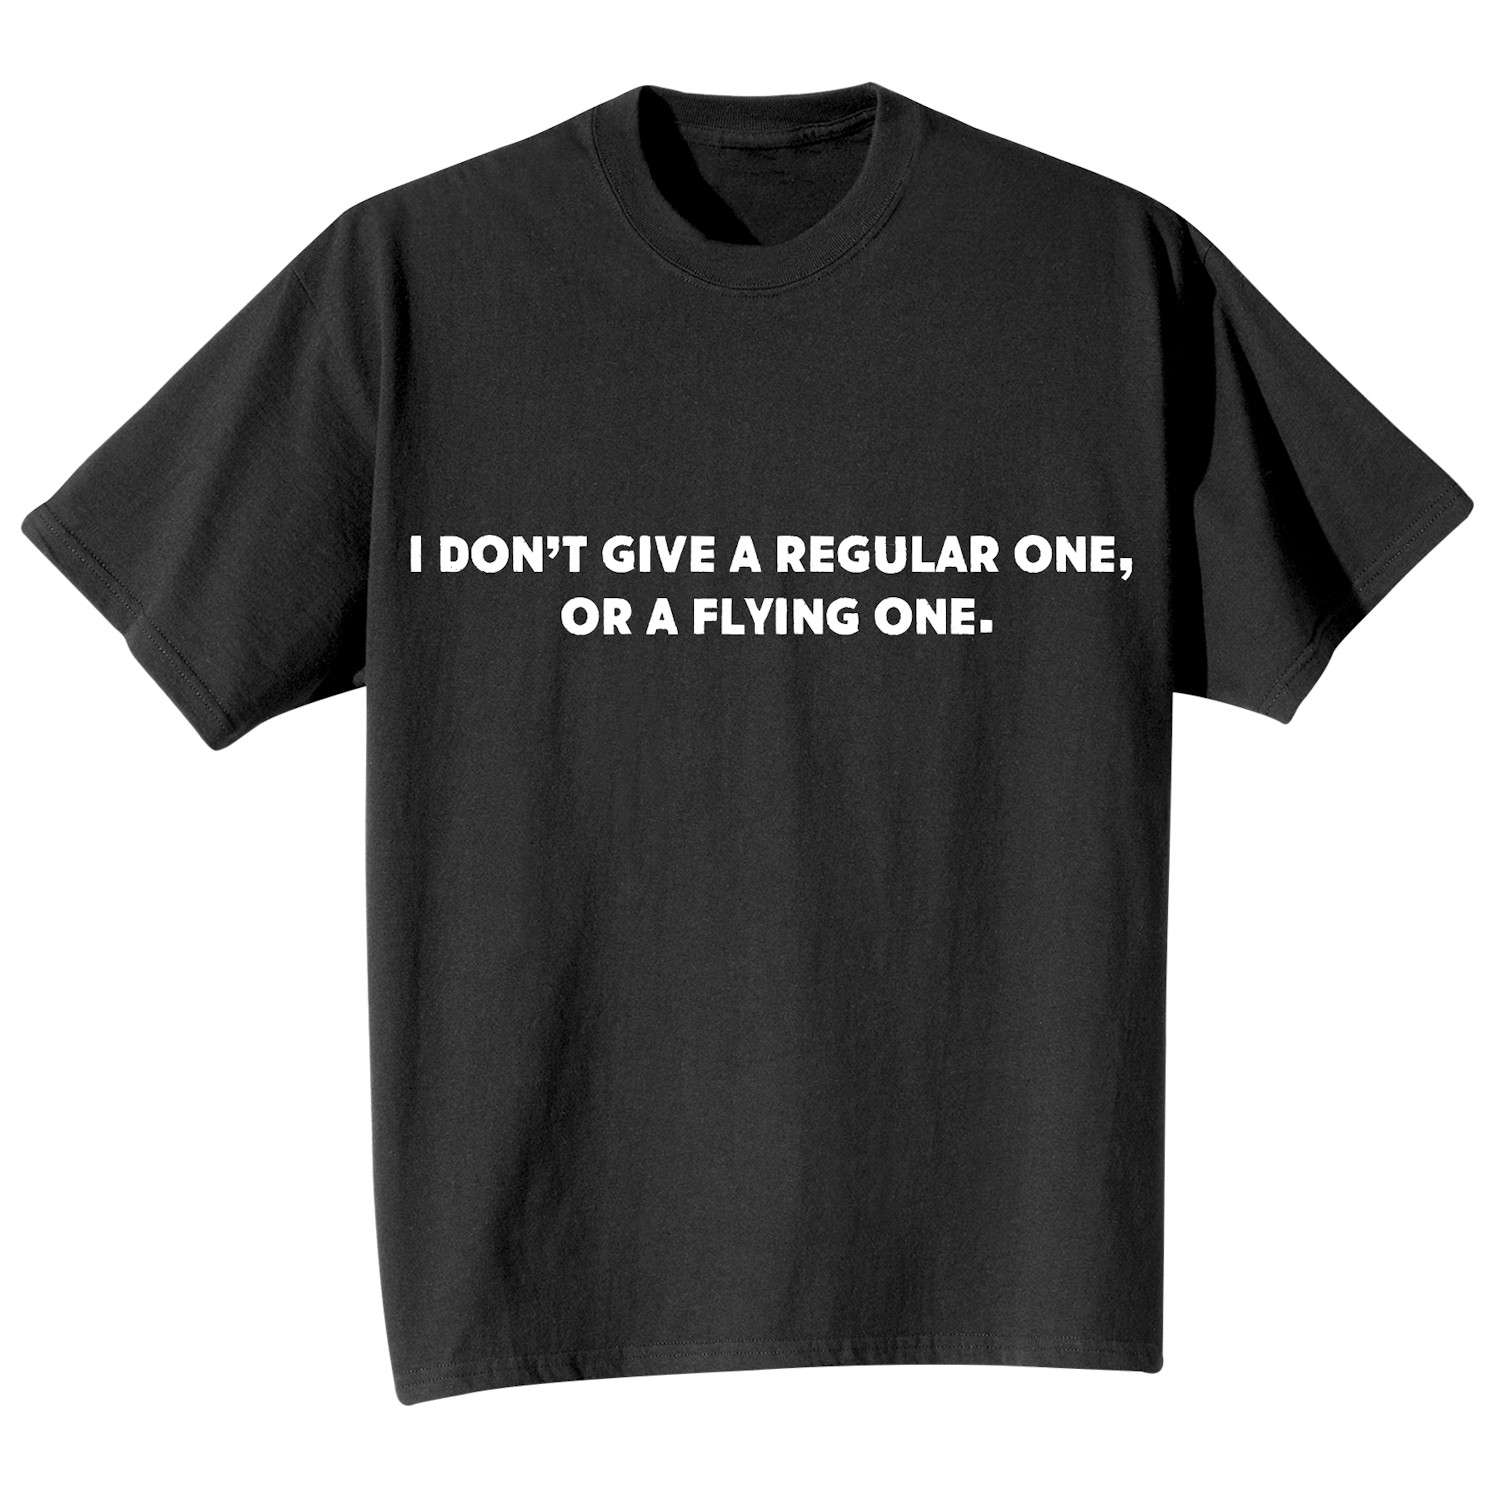 I Don't Give A Regular One, Or A Flying One. T-Shirt or Sweatshirt ...